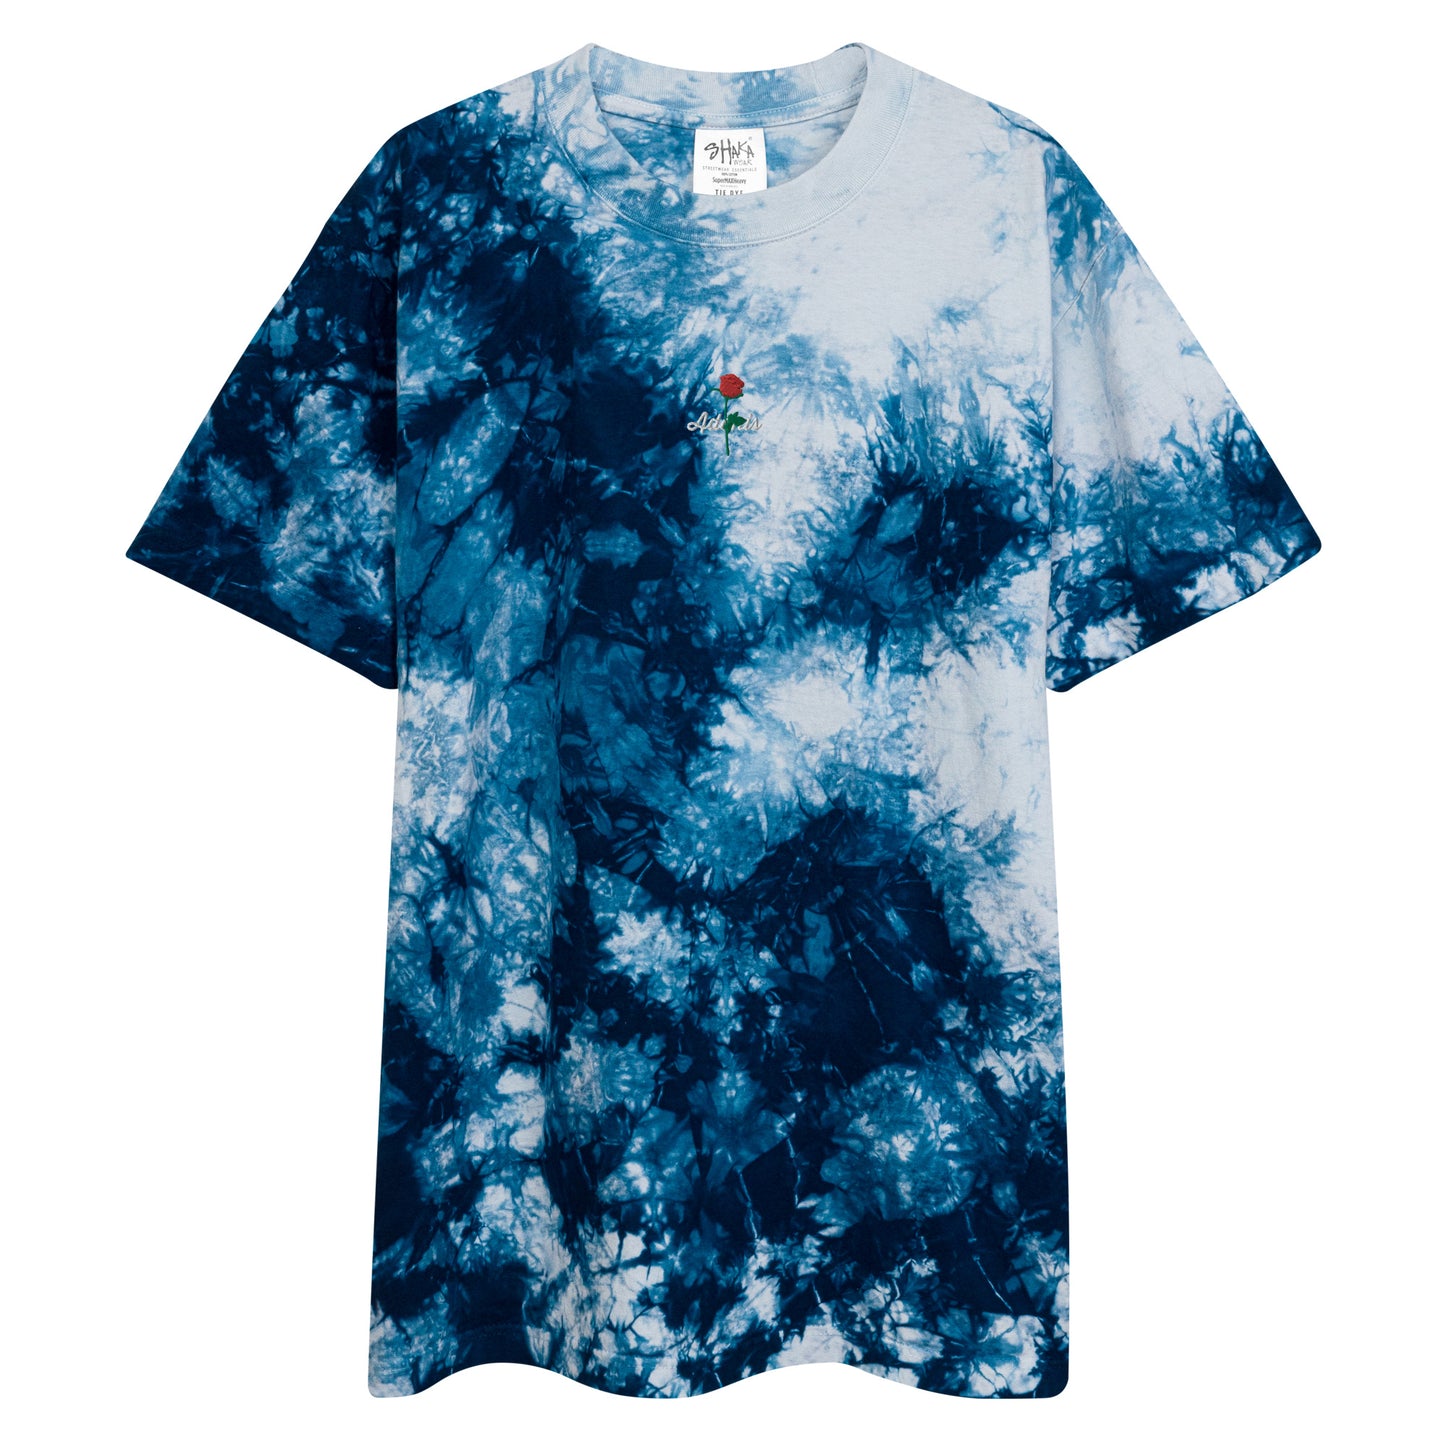 Adonis-Creations - Embroidered Unisex Tie Dye short sleeve T Shirt